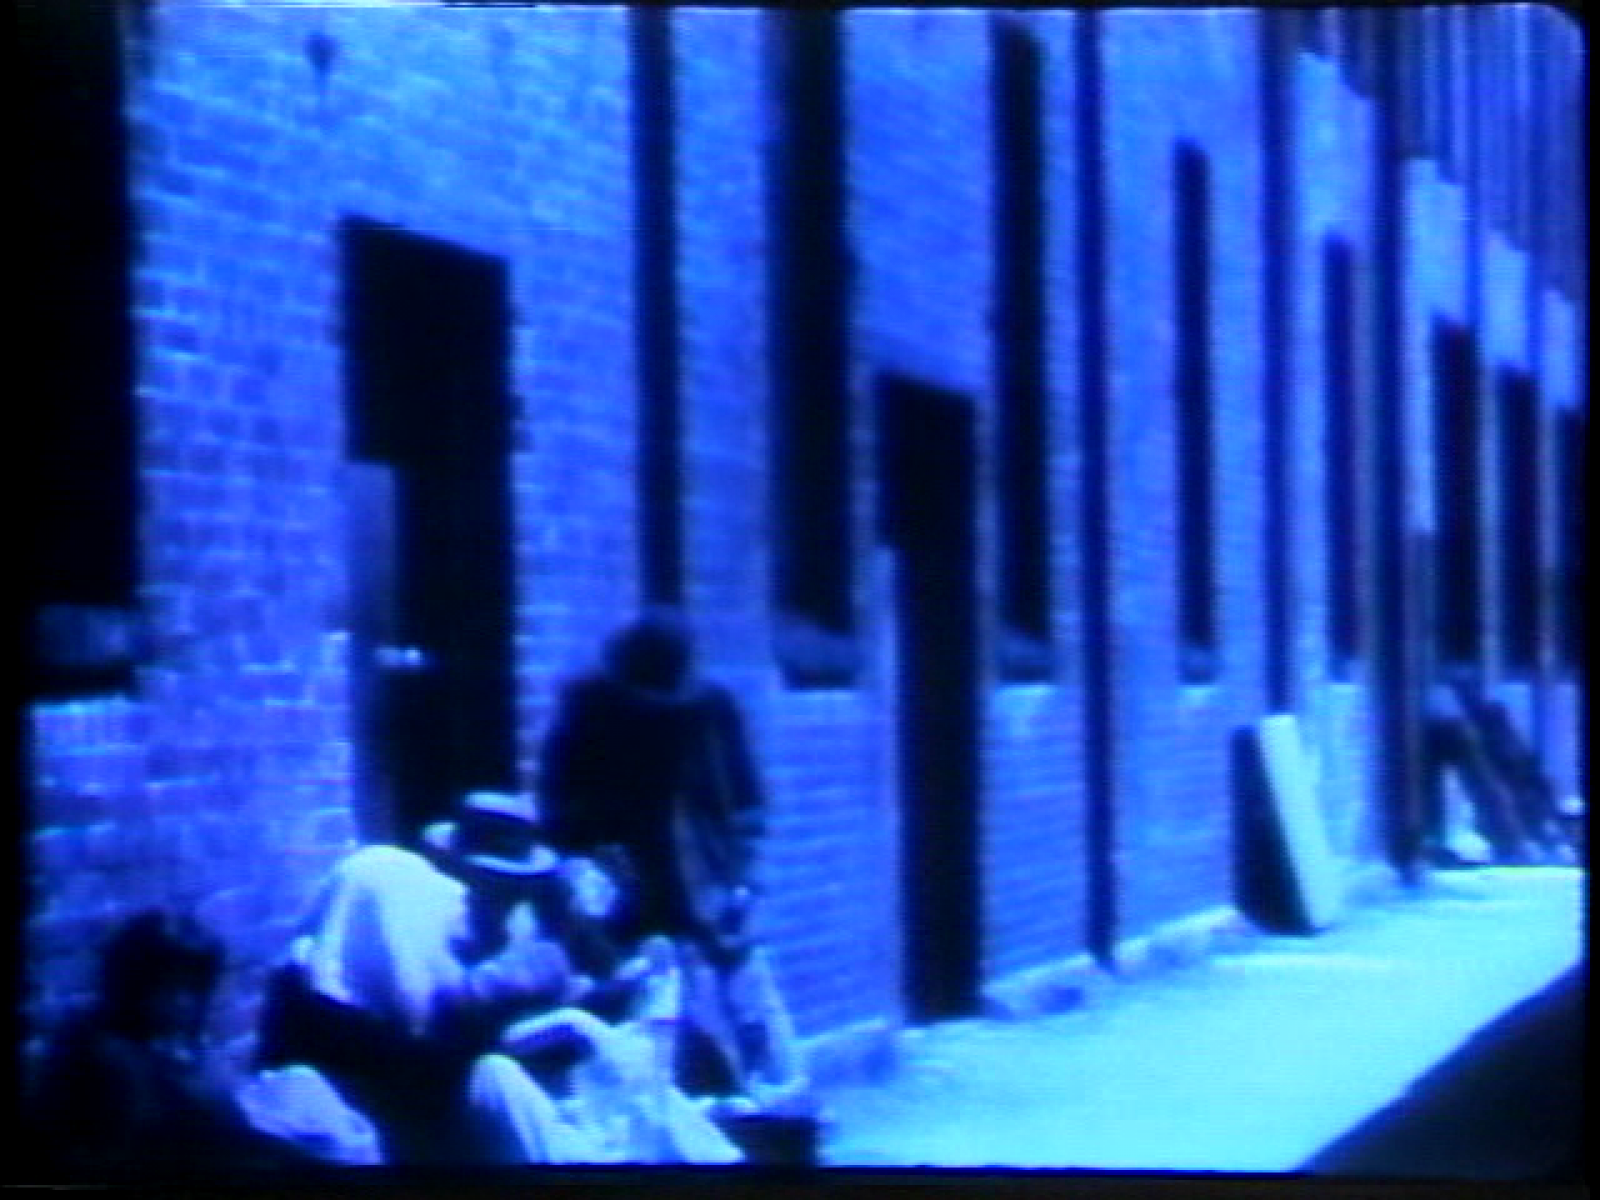 Ian Wallace, Poverty 1980 (still), 1980, 16mm film transferred to digital, dimensions variable